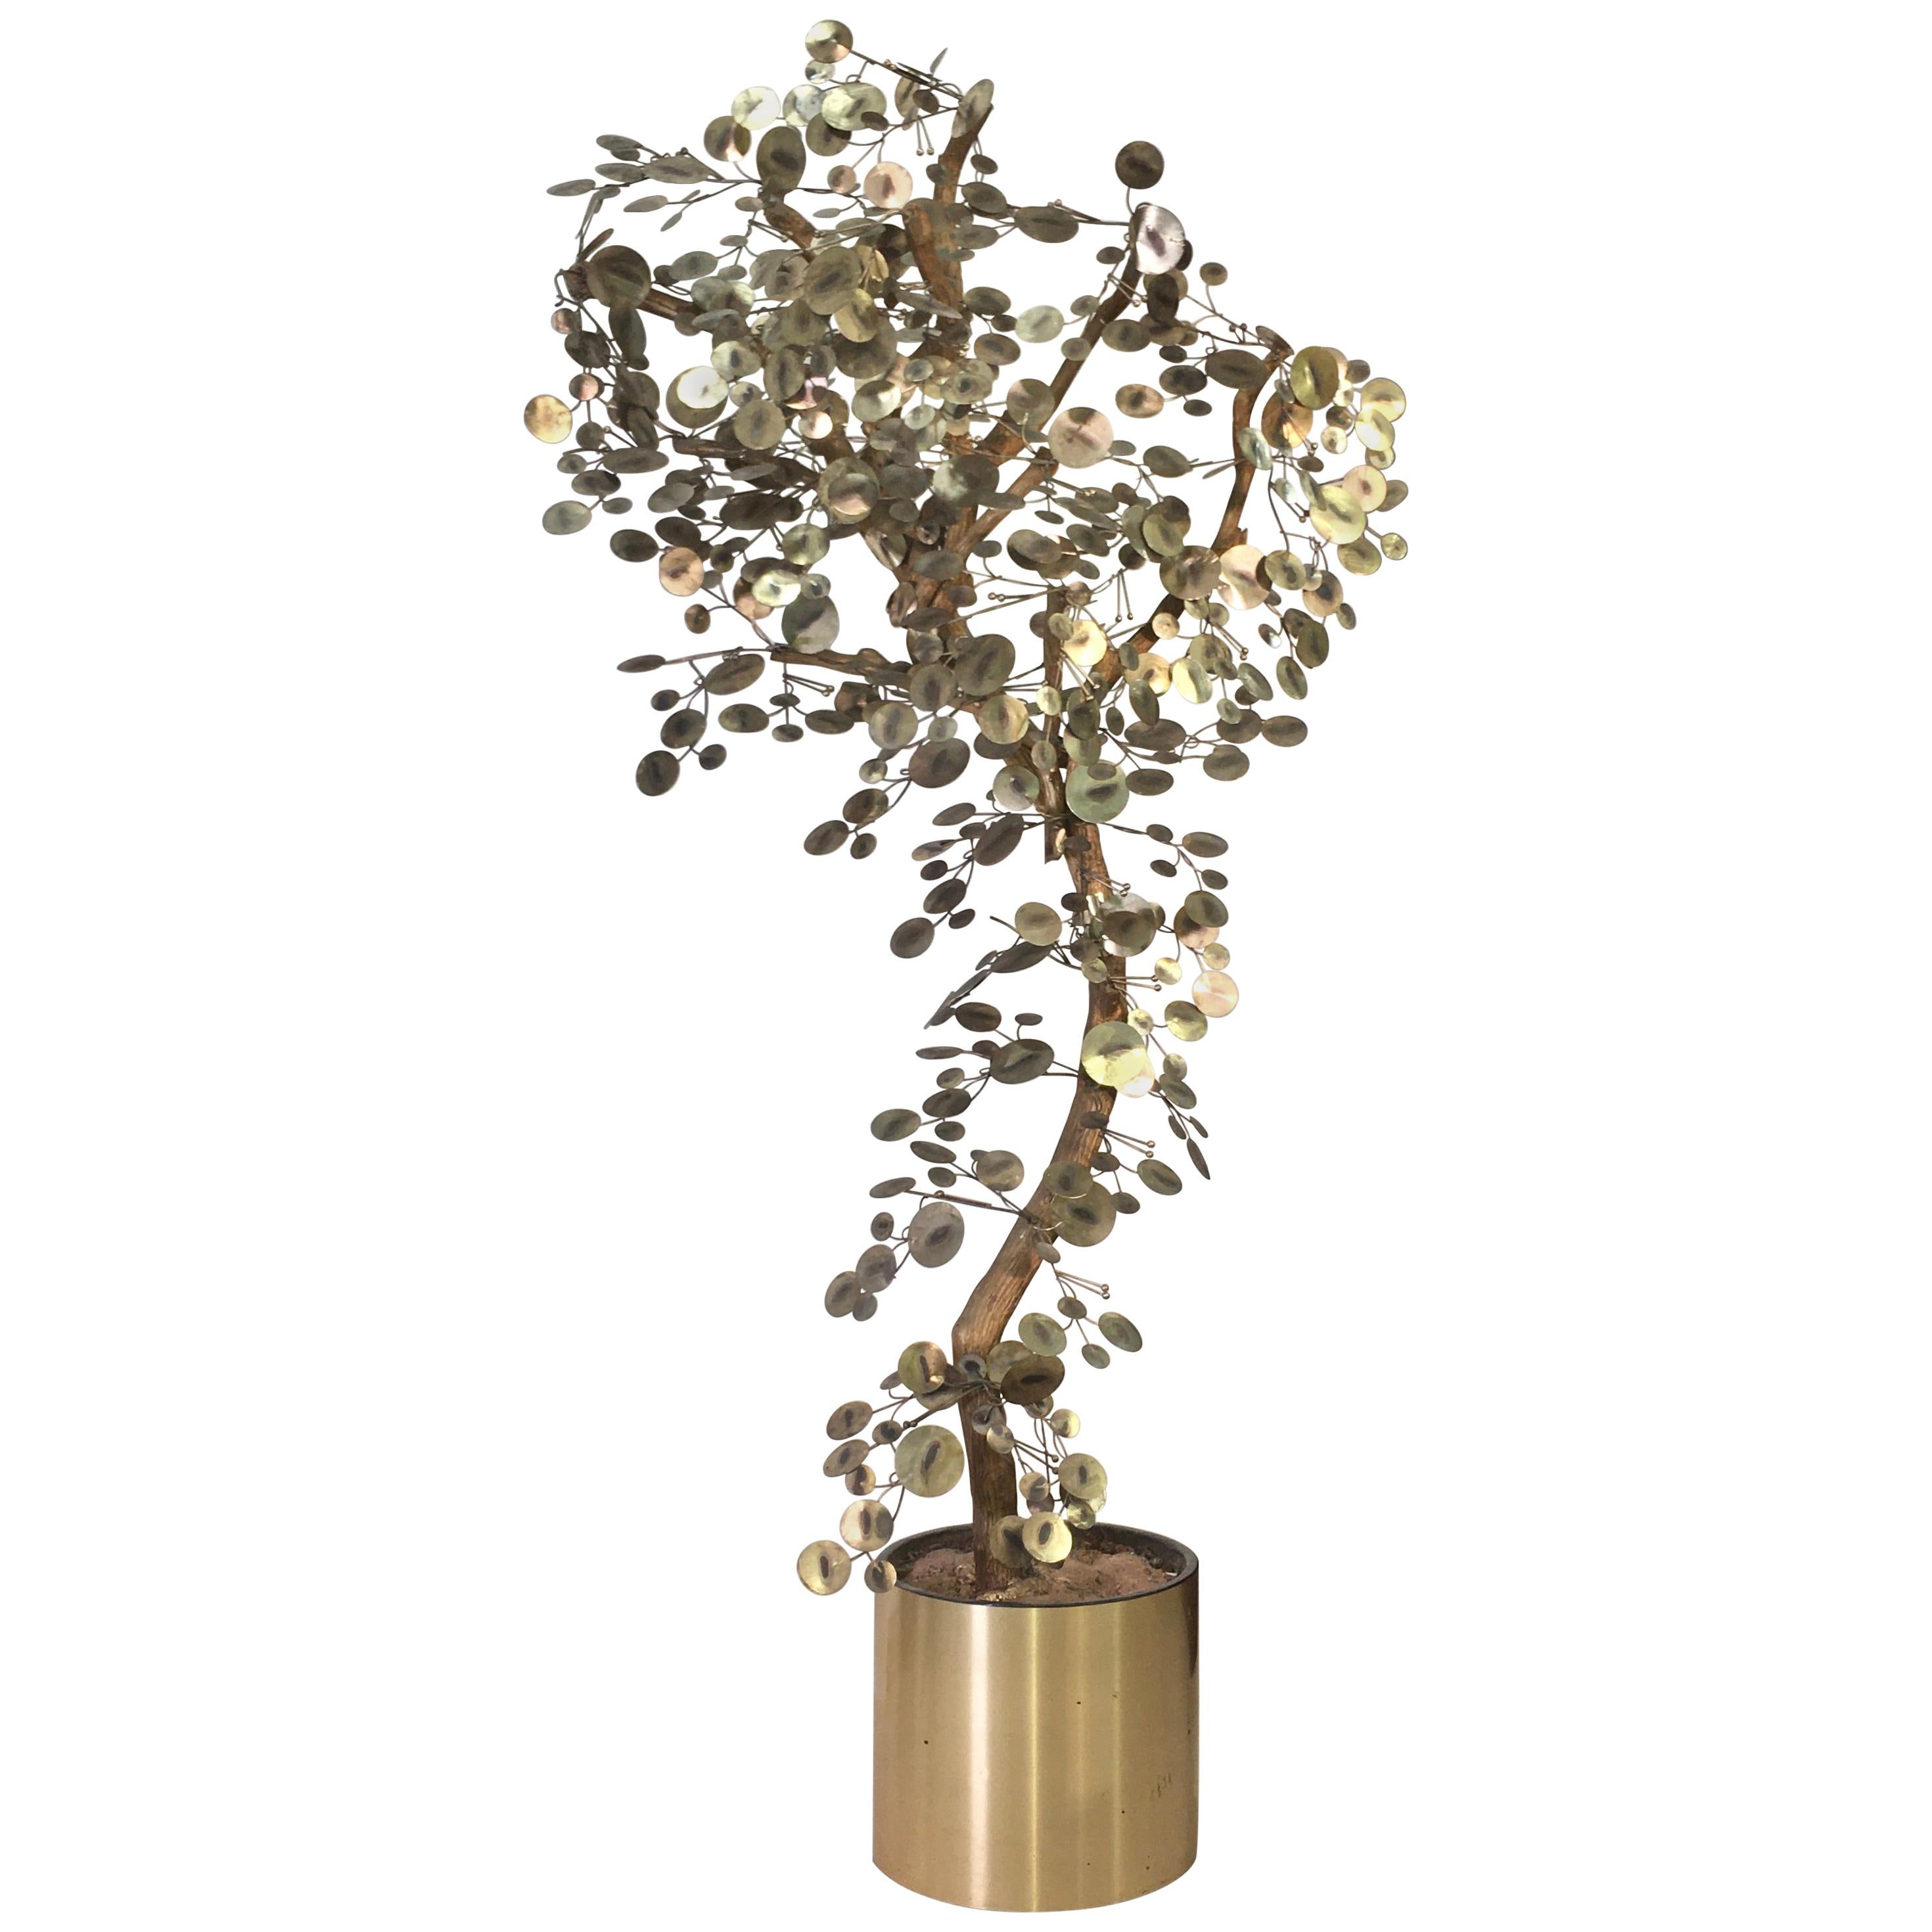 Curtis Jere "Raindrops" Brass Tree For Sale